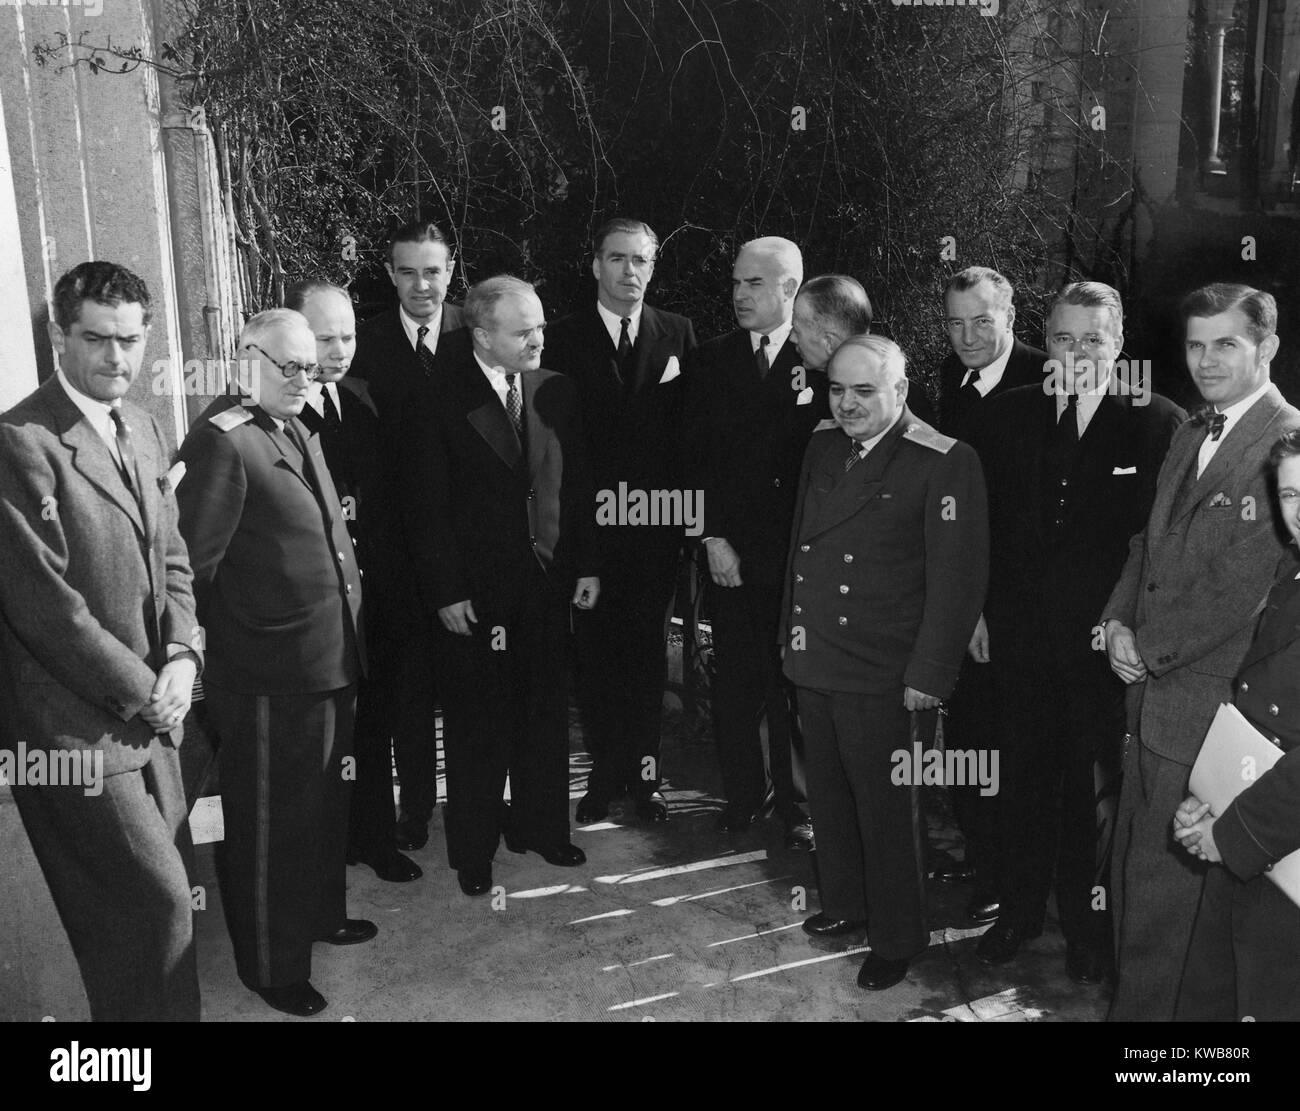 Foreign ministers and delegates to the Yalta Conference, Feb. 4–11, 1945. 2nd from left, Andrey Vishinsky; 4th from left, Averill Harriman; 5th from left, Vyacheslav Molotov; 6th from left, Anthony Eden; 7th from left, Edward Stettinius; 8th from left, Alexander Cadogan; and on far right, Alger Hiss. World War 2. (BSLOC_2014_8_201) Stock Photo